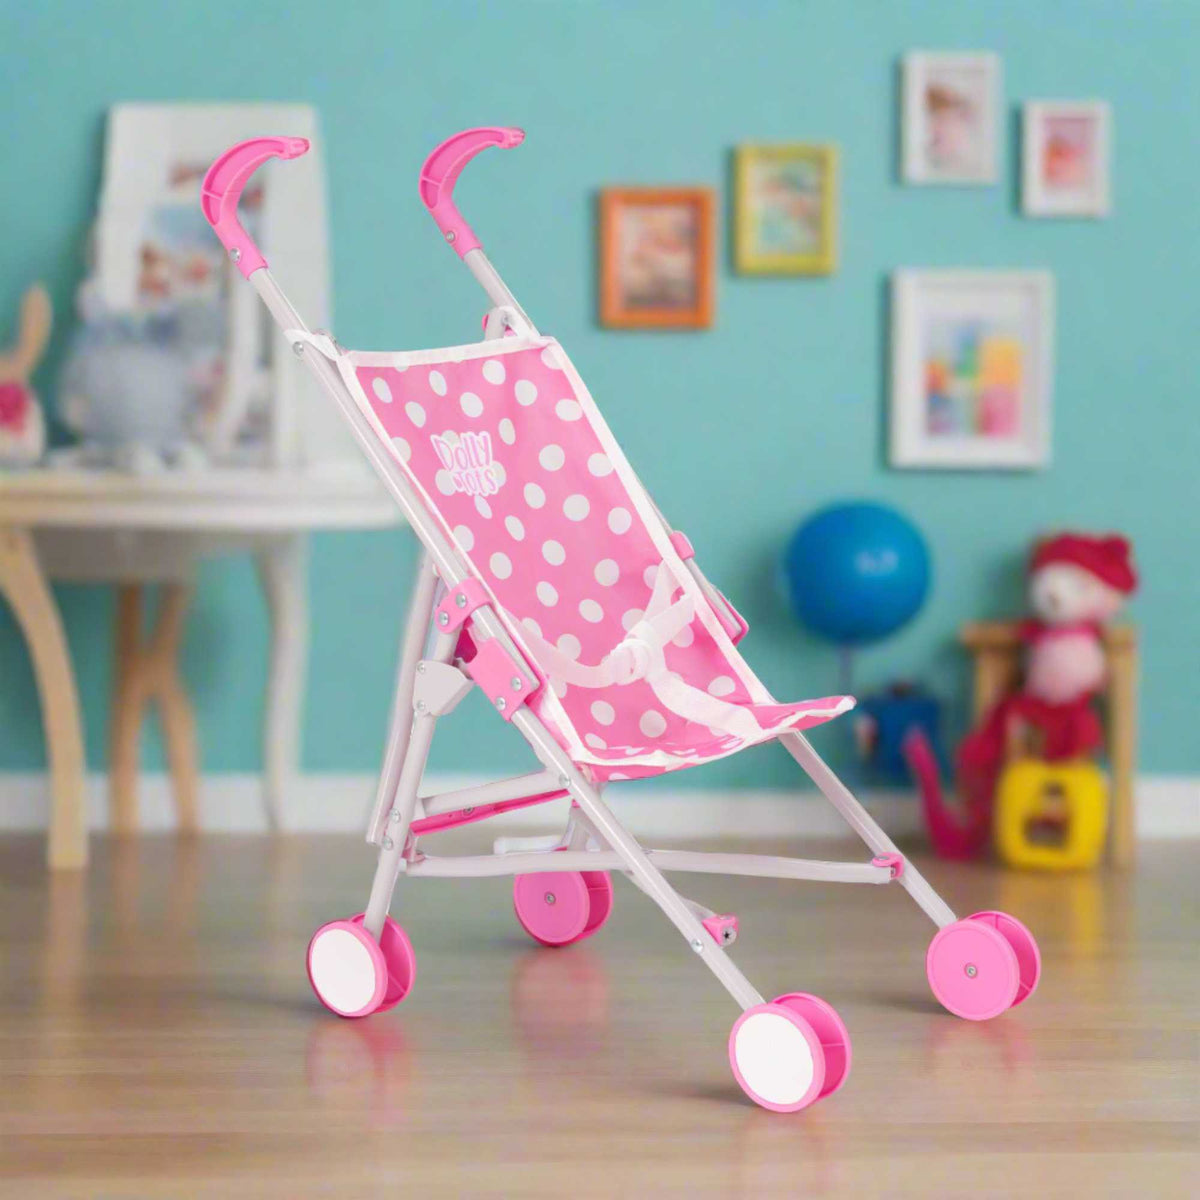 Dolly Tots Dolls Single Stroller - Lightweight and Easy-to-Use Toy Stroller for Dolls